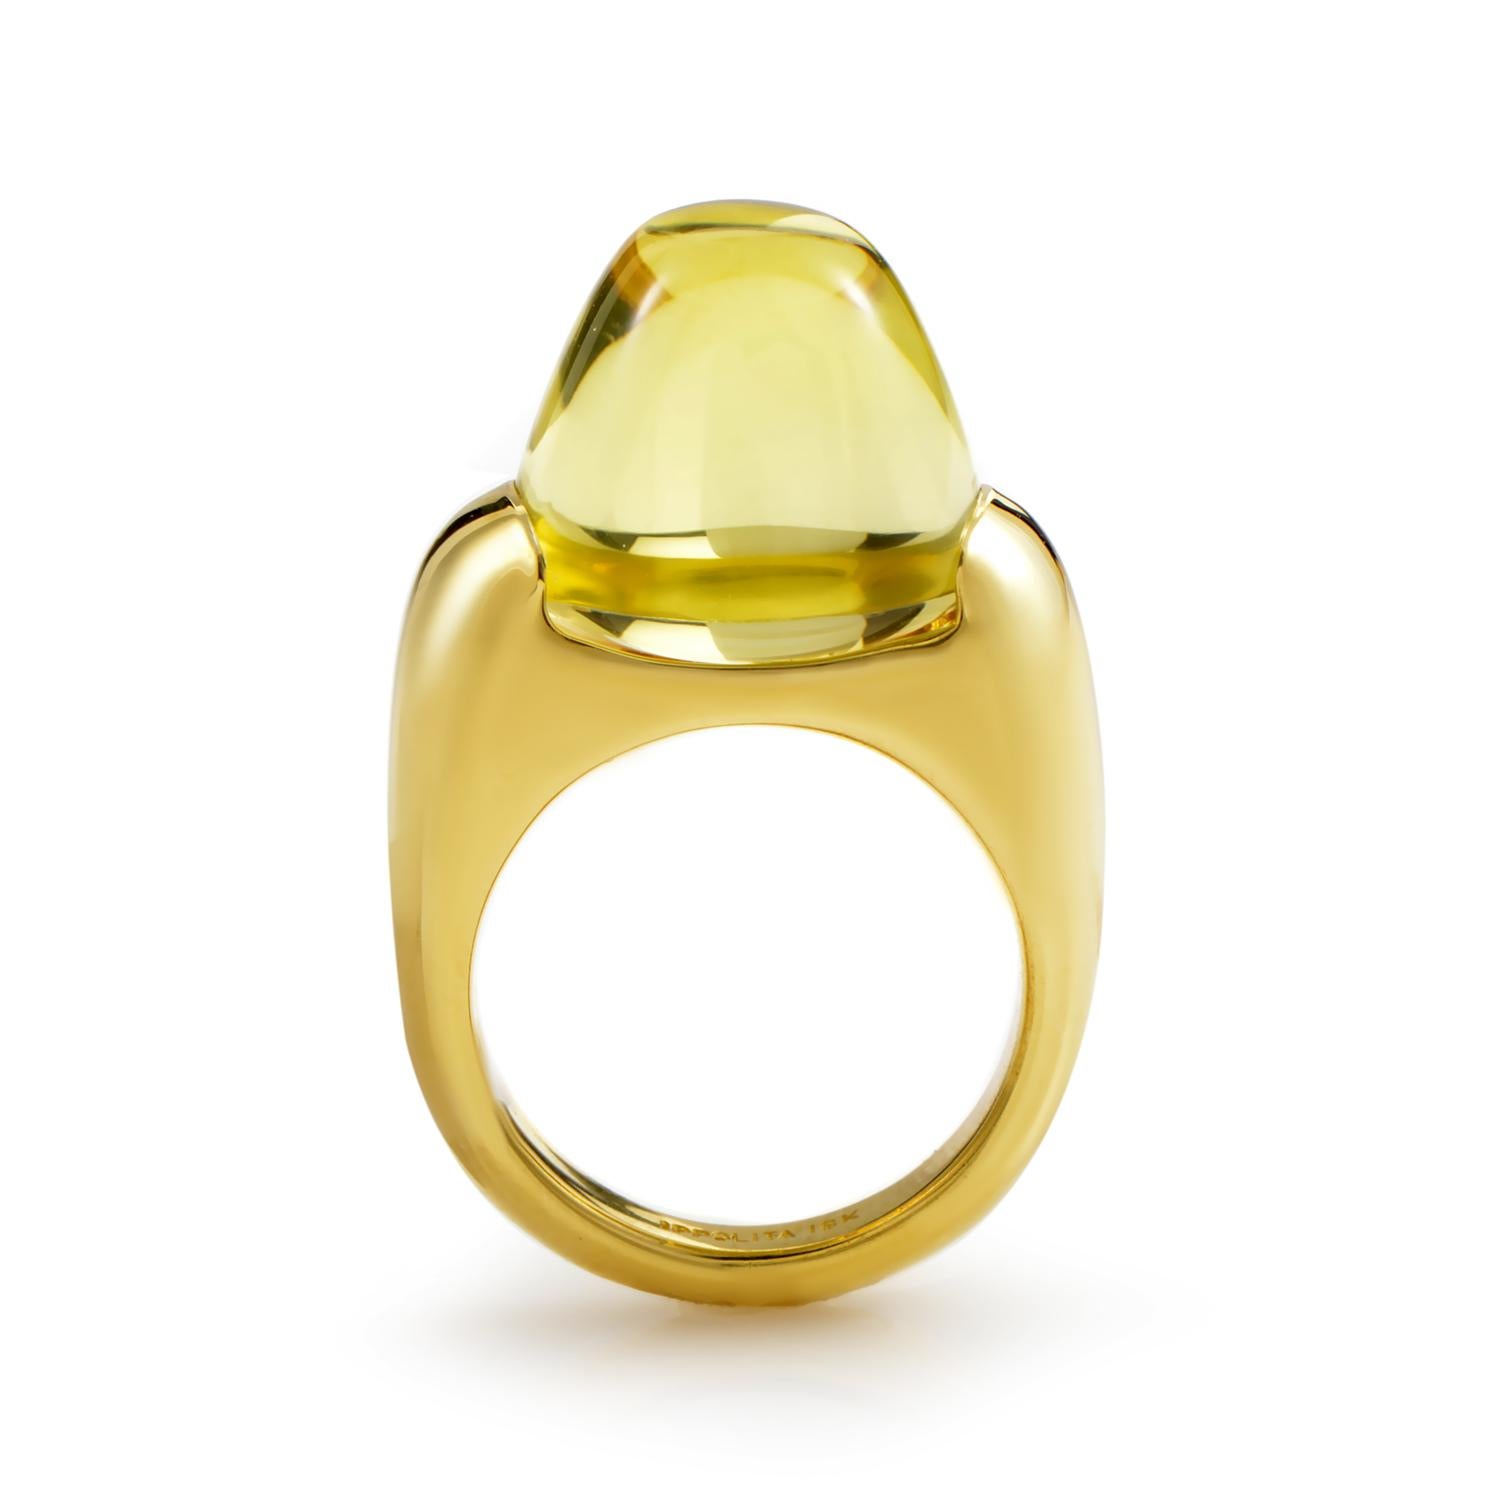 The warm golden glow exuded by this dazzling ring from Ippolita is absolutely spellbinding! The ring is made of 18K yellow gold and boasts a lemon quartz cabochon main stone.
Ring Size: 6.0